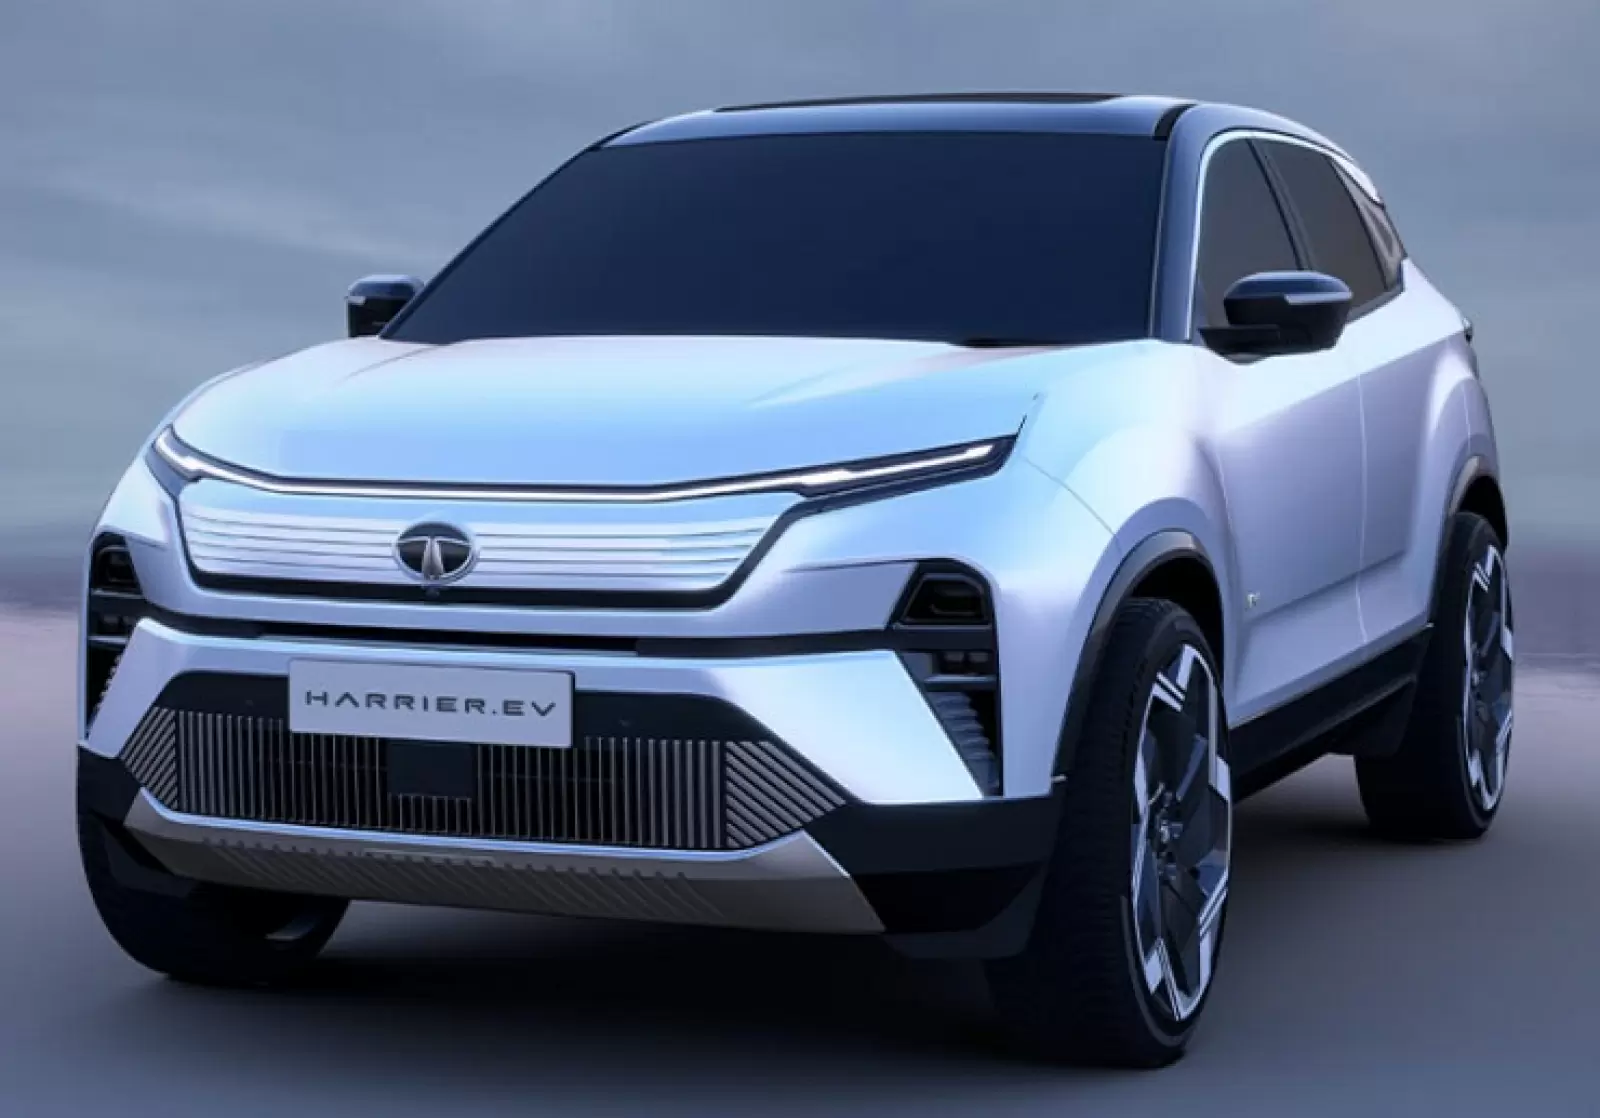 Two new electric SUVs from Tata Motors will soon go on sale; they can travel 500 km on a single charge